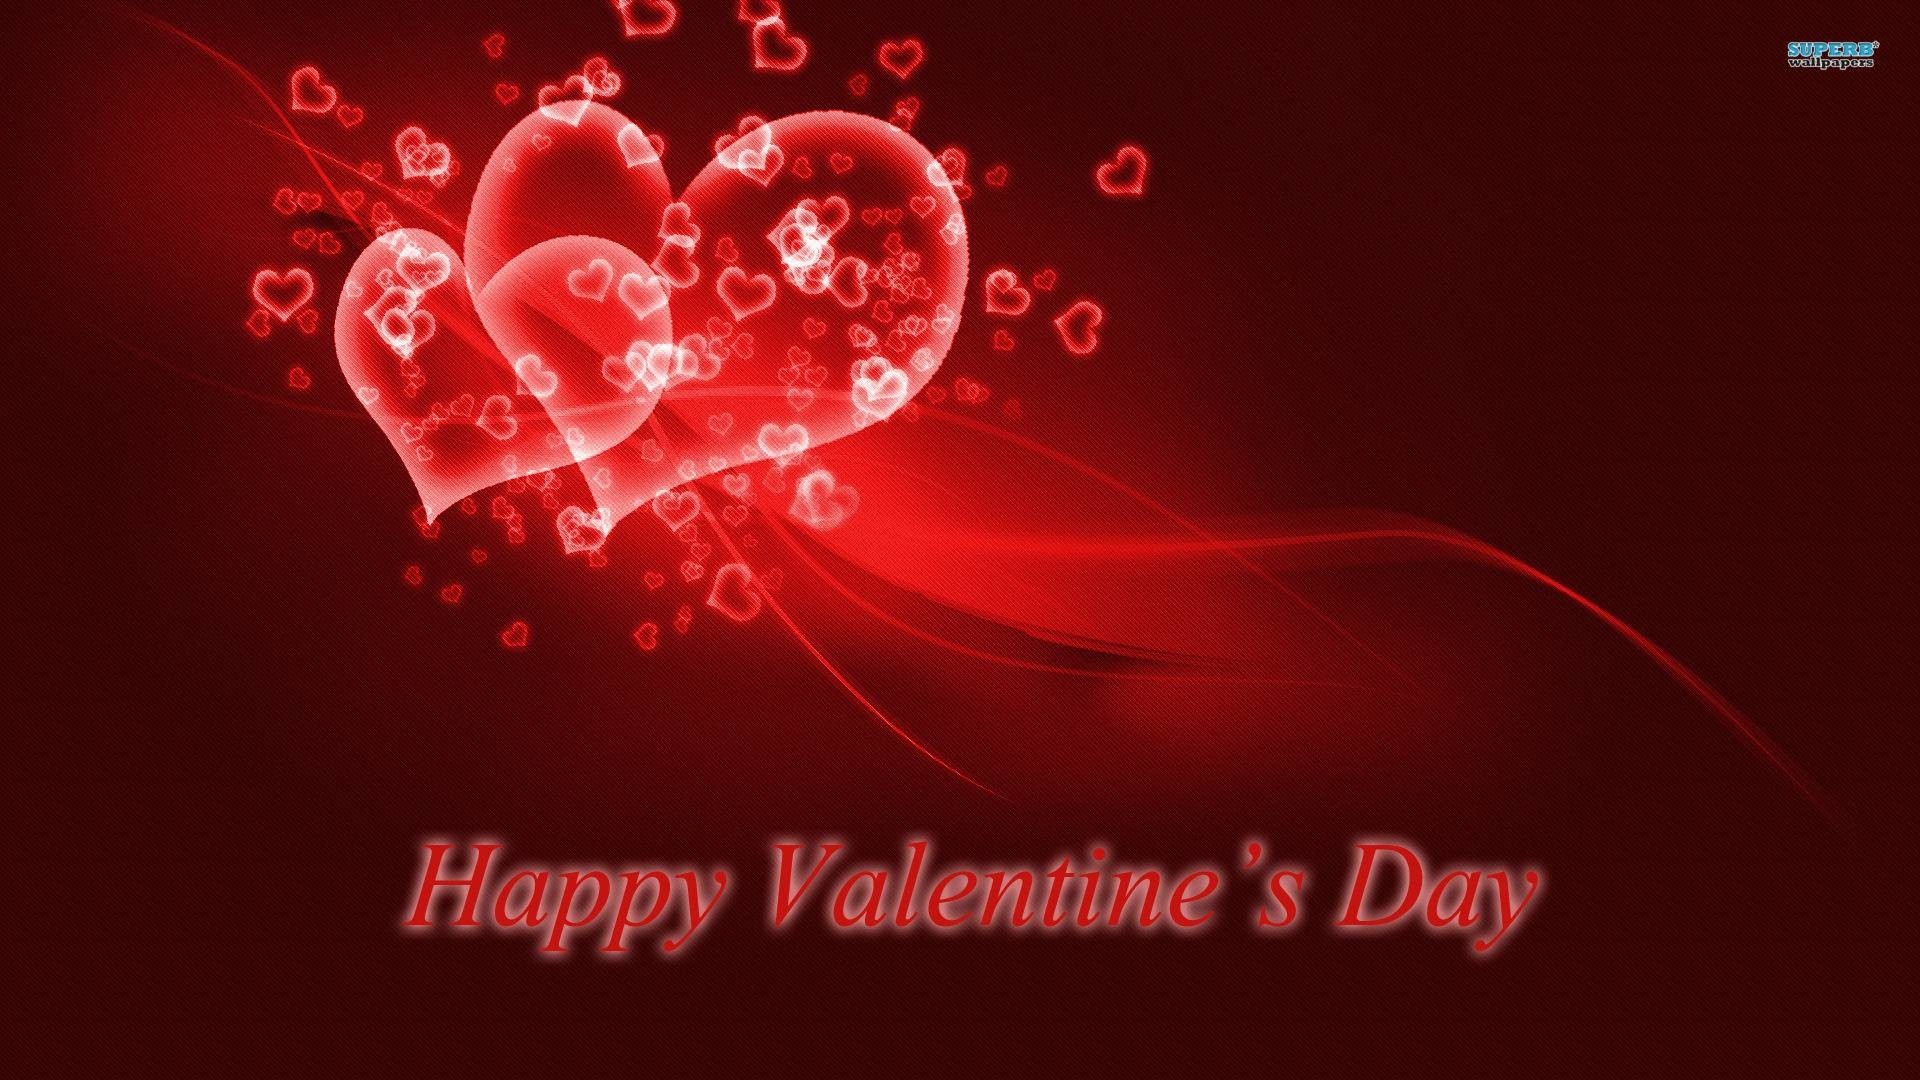 Valentine Backgrounds and Wallpaper 56 images